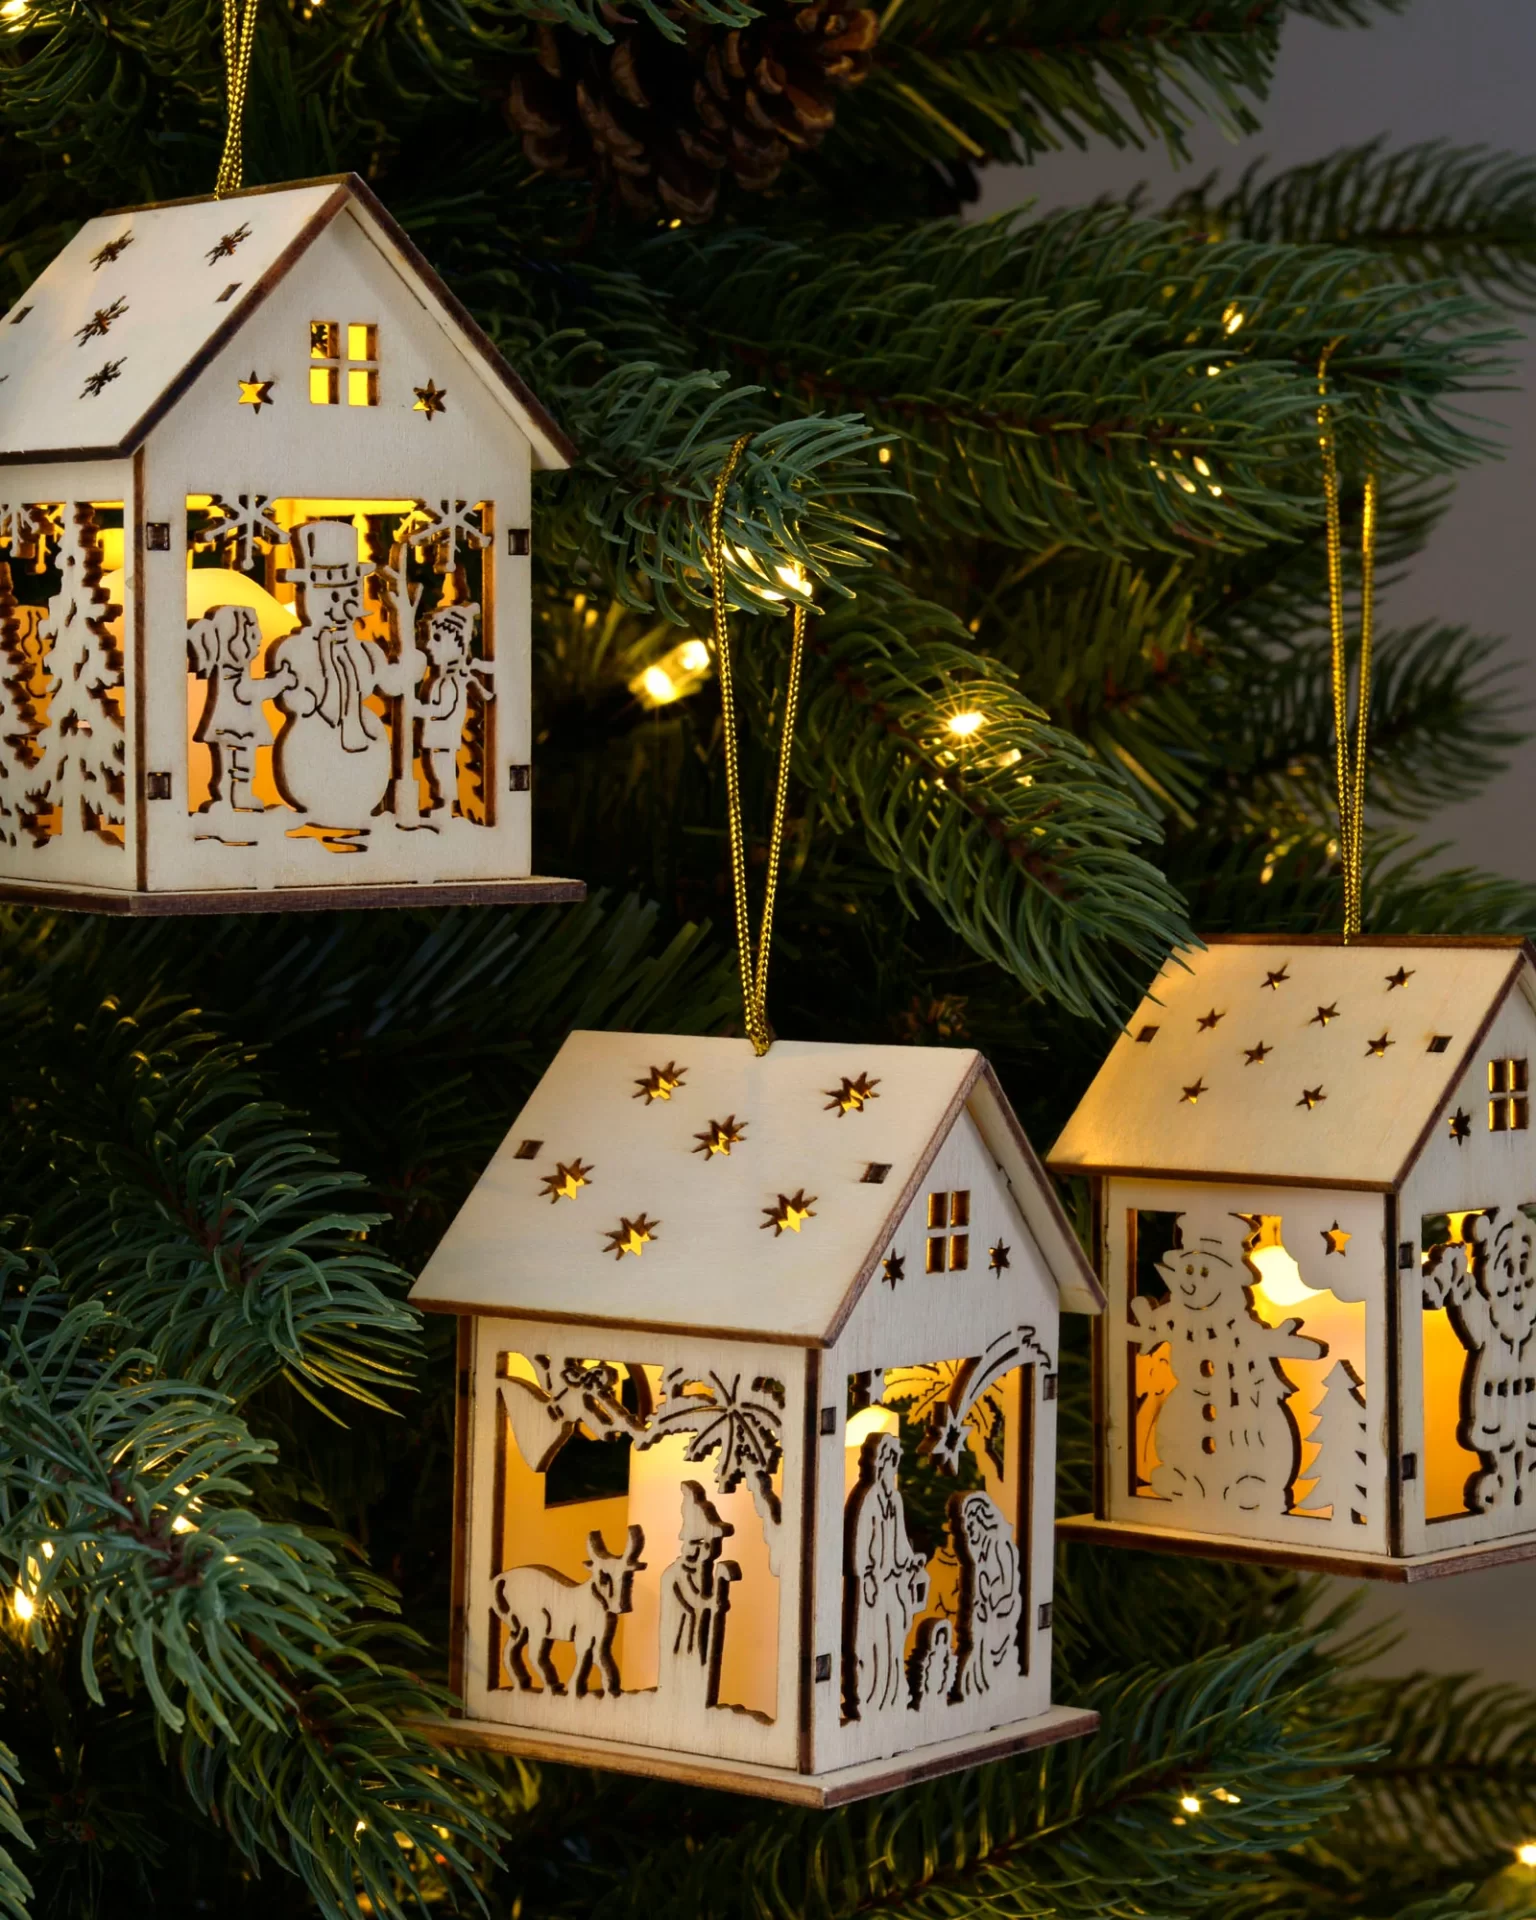 The nativity scene is often seen as the defining element of Christmas. It's a representation of the holiday season, and its heartwarming message often resonates with many people. The birth of the Christian Saviour is a special moment, and you can recreate it in your home with delightful nativity house hanging decorations.